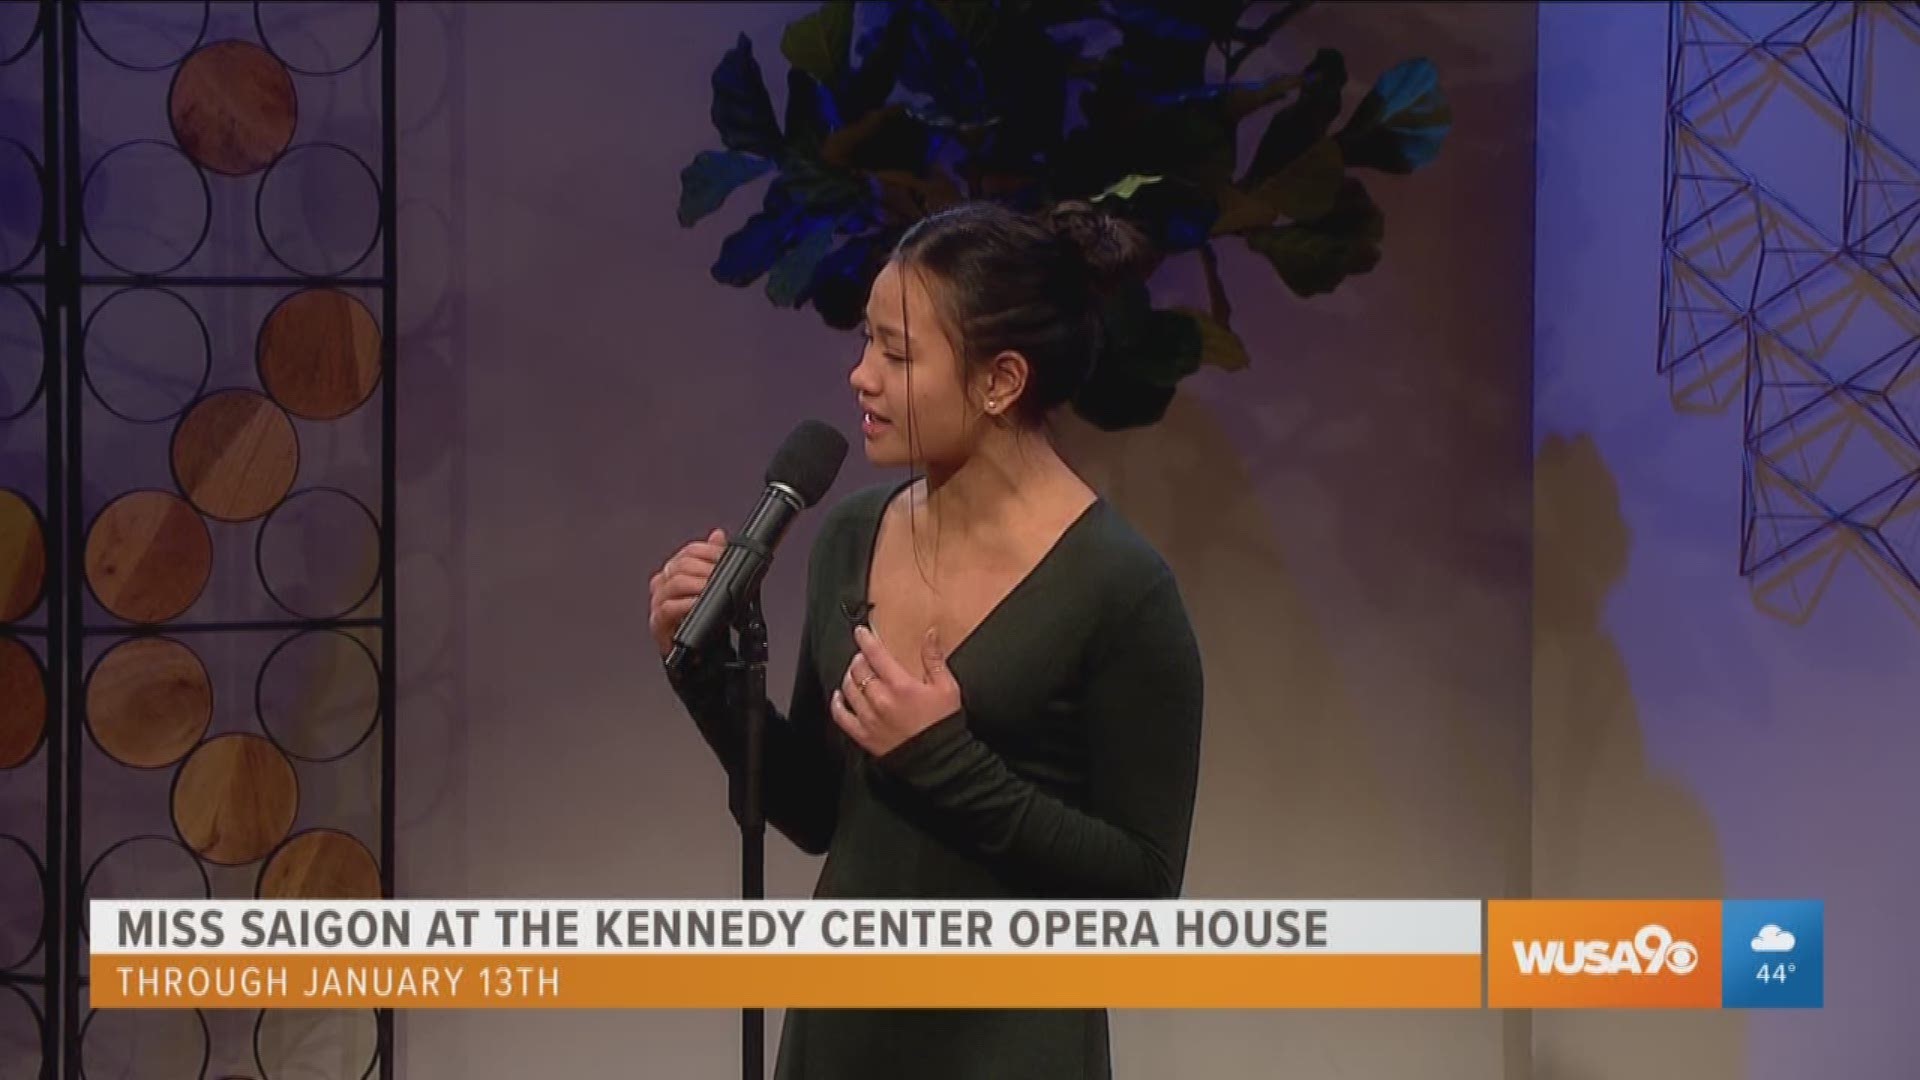 Broadway actress Emily Bautista performs "I'd Give My Life for You" from the show 'Miss Saigon' that you can see now at the Kennedy Center.